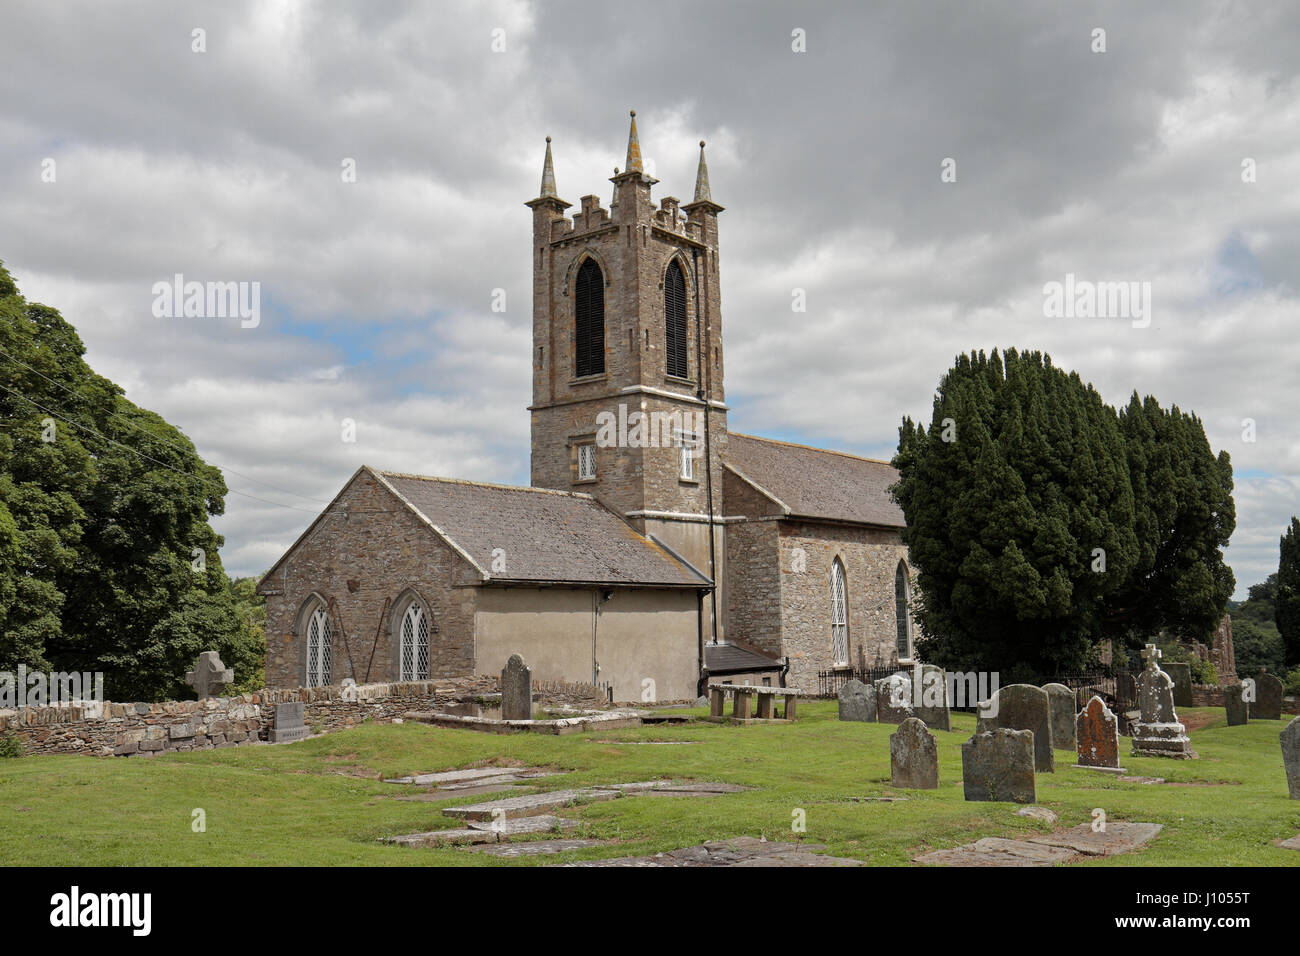 Die Cathedral Church of St Edan, Church of Ireland in Ferns, County Wexford, Irland (Eire). Stockfoto